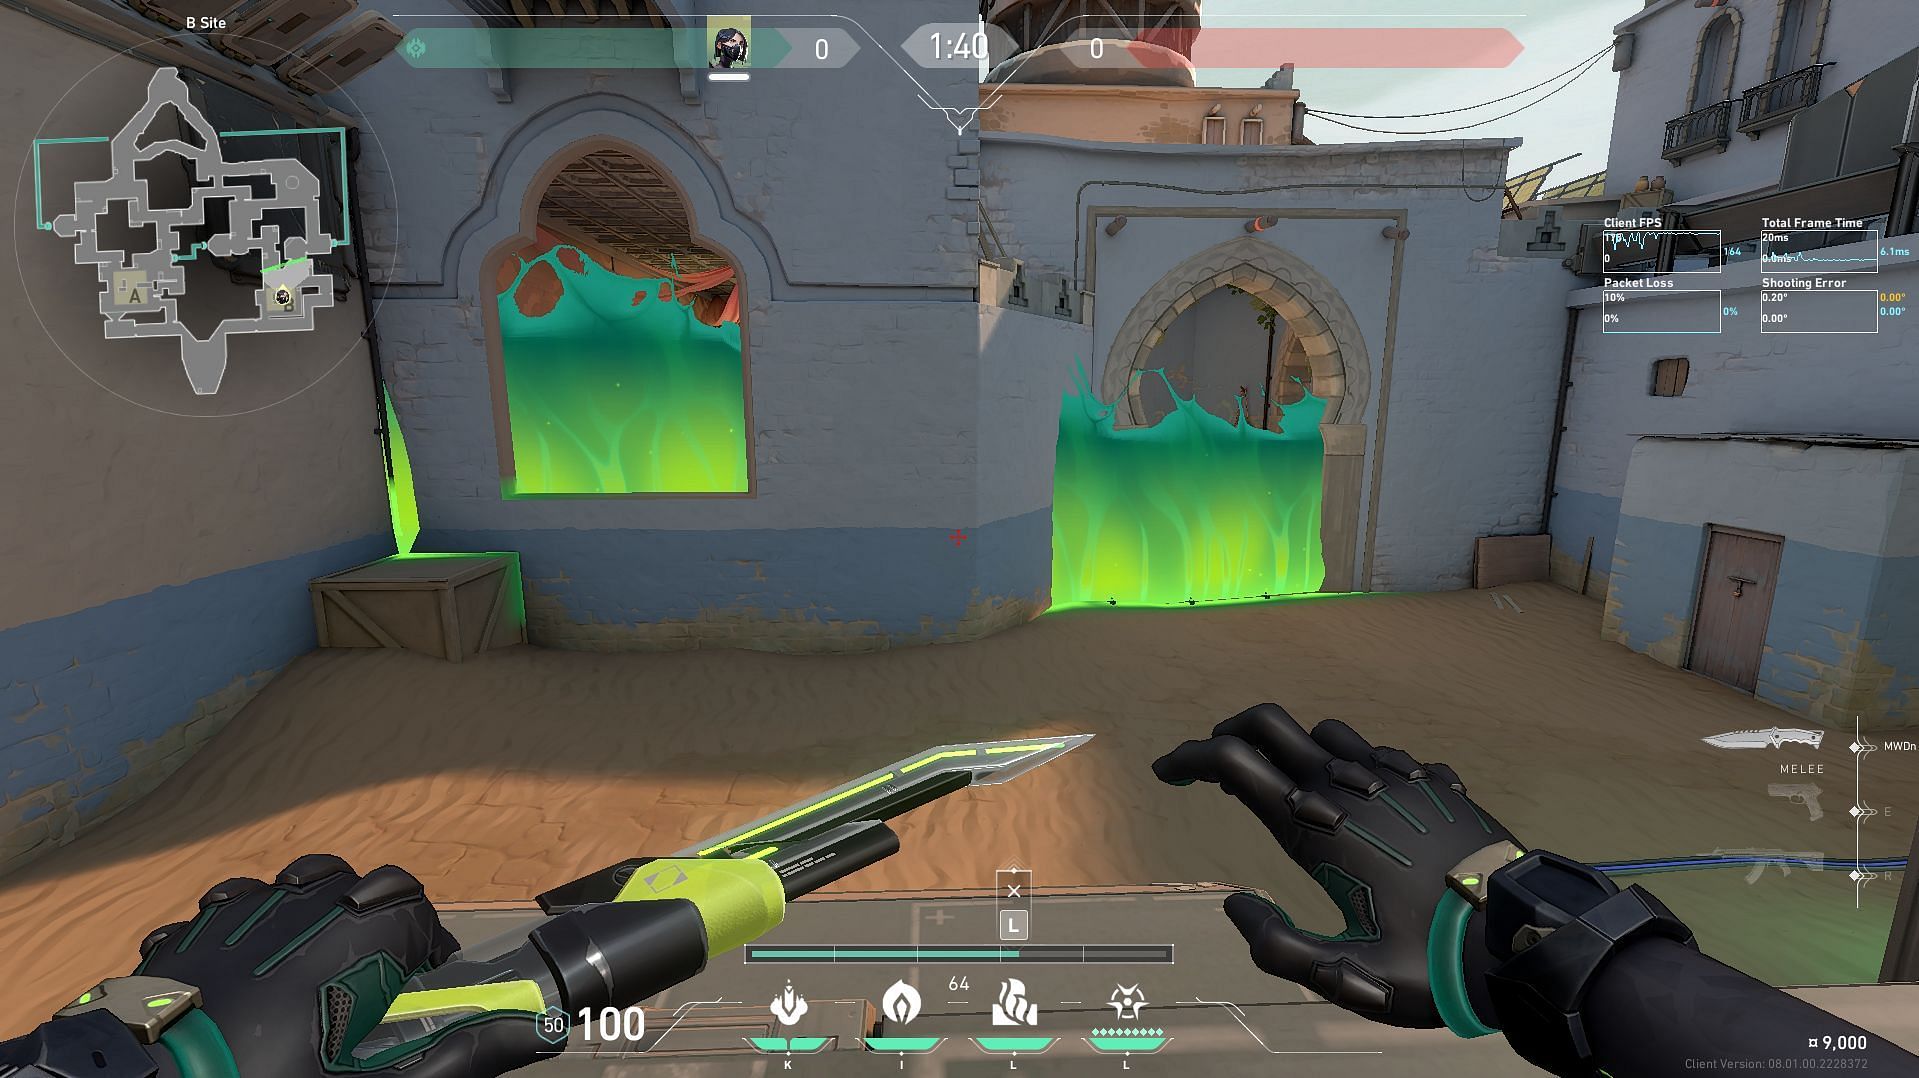 Toxic Screen covering B Window and B Garden (Image via Riot Games)